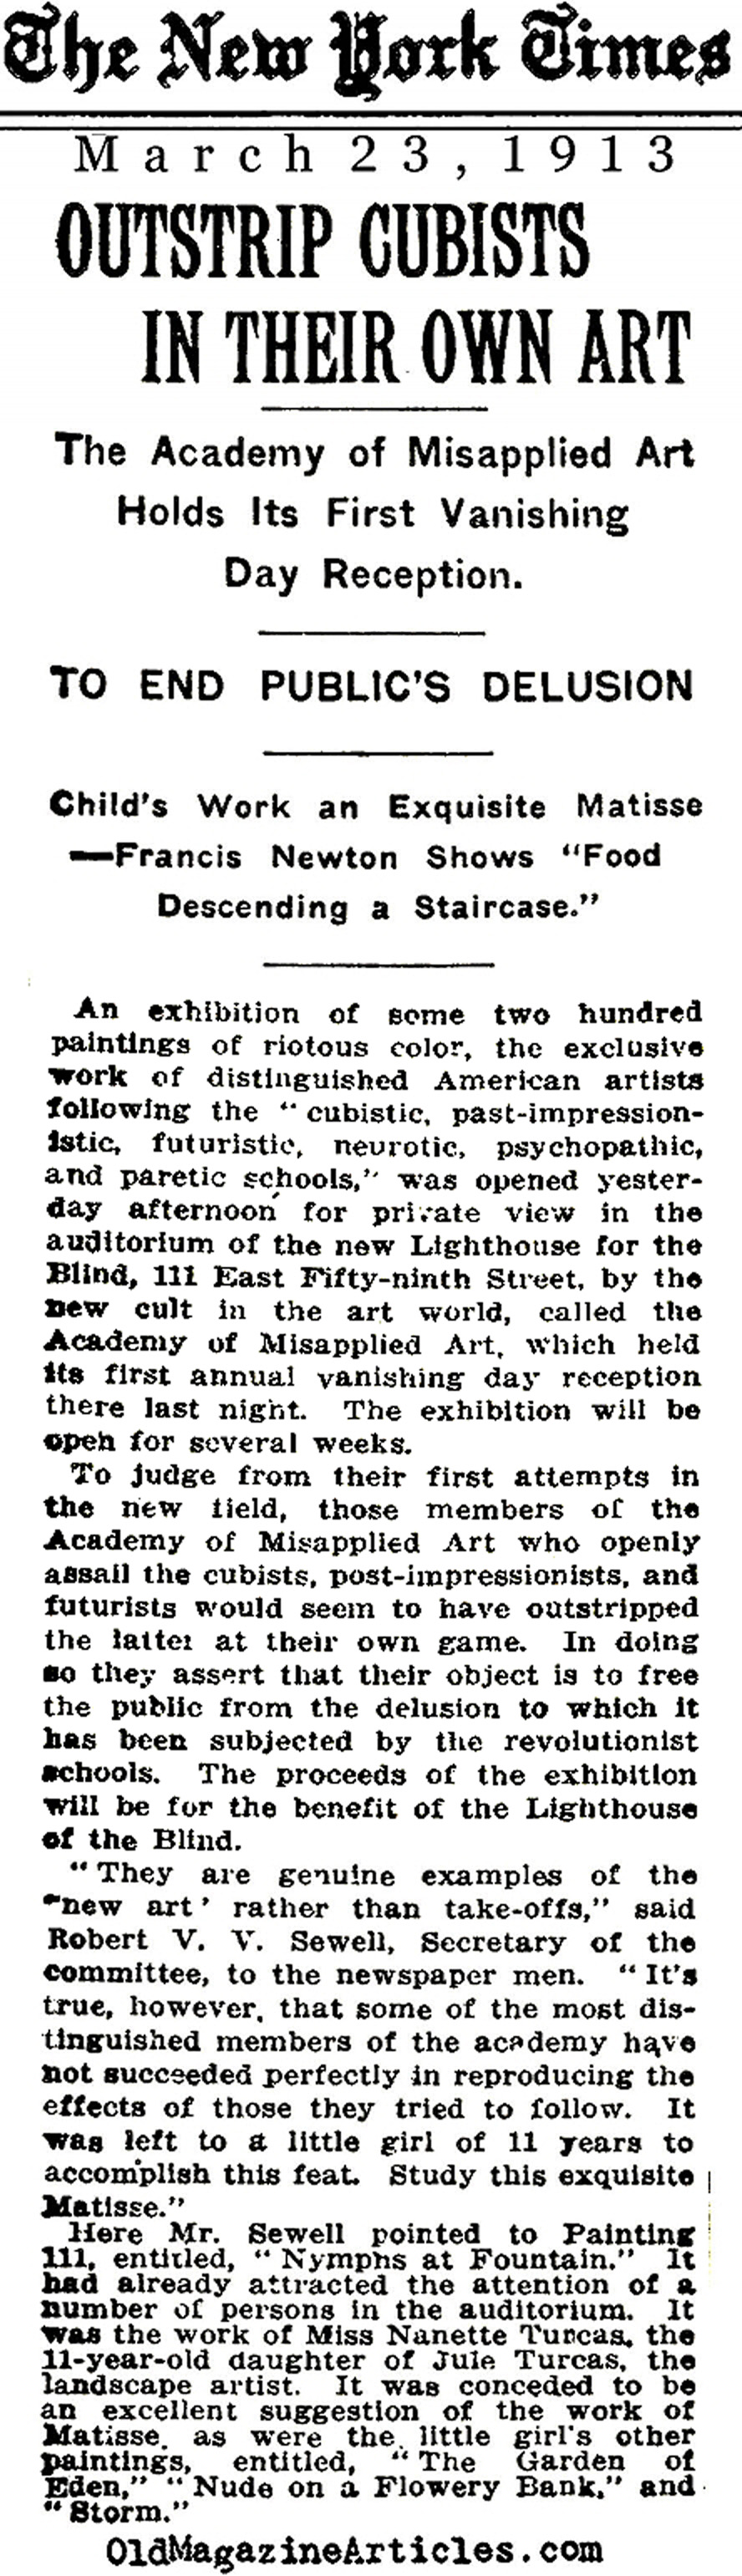 Academy of Misapplied Art</i> Assailed Cubism (NY Times, 1913)